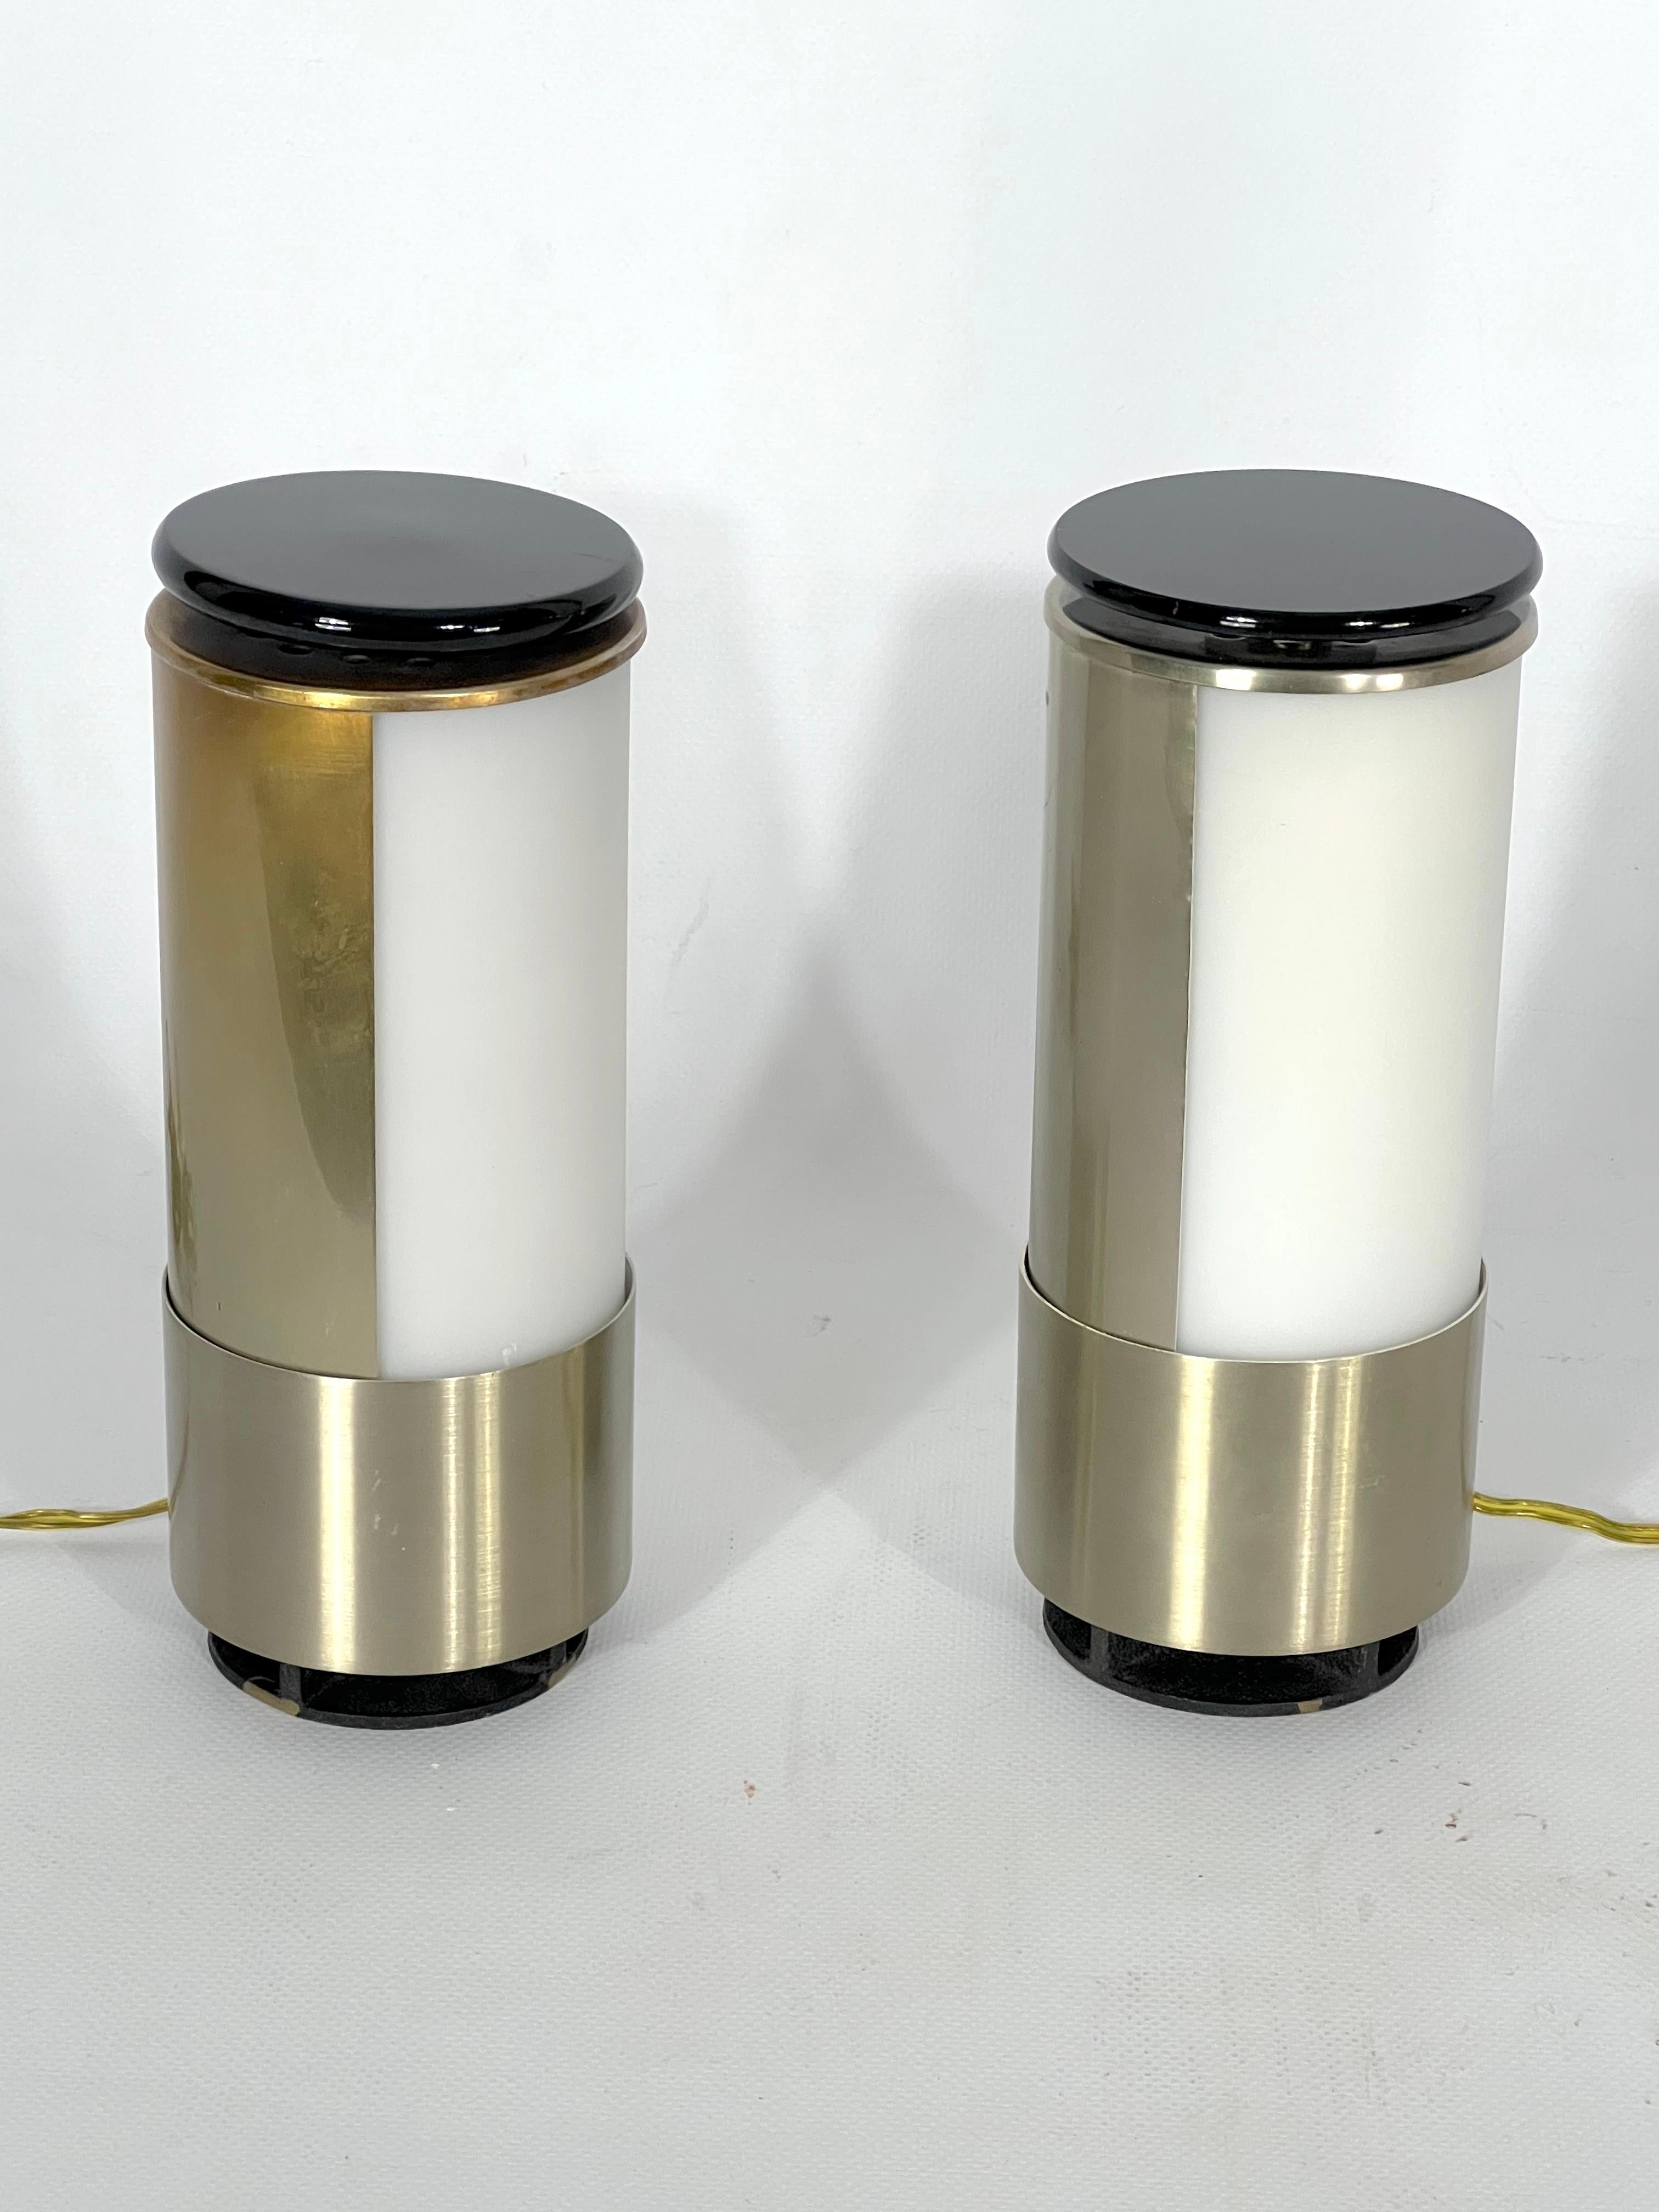 Good vintage condition with trace of age and use for this set of two table lamps produced by Lumi Milano during the 60s. Made from nicheled brass, lacquer, opaline glass. The light can be modulate by a metal screen inside the lamp. Full working with